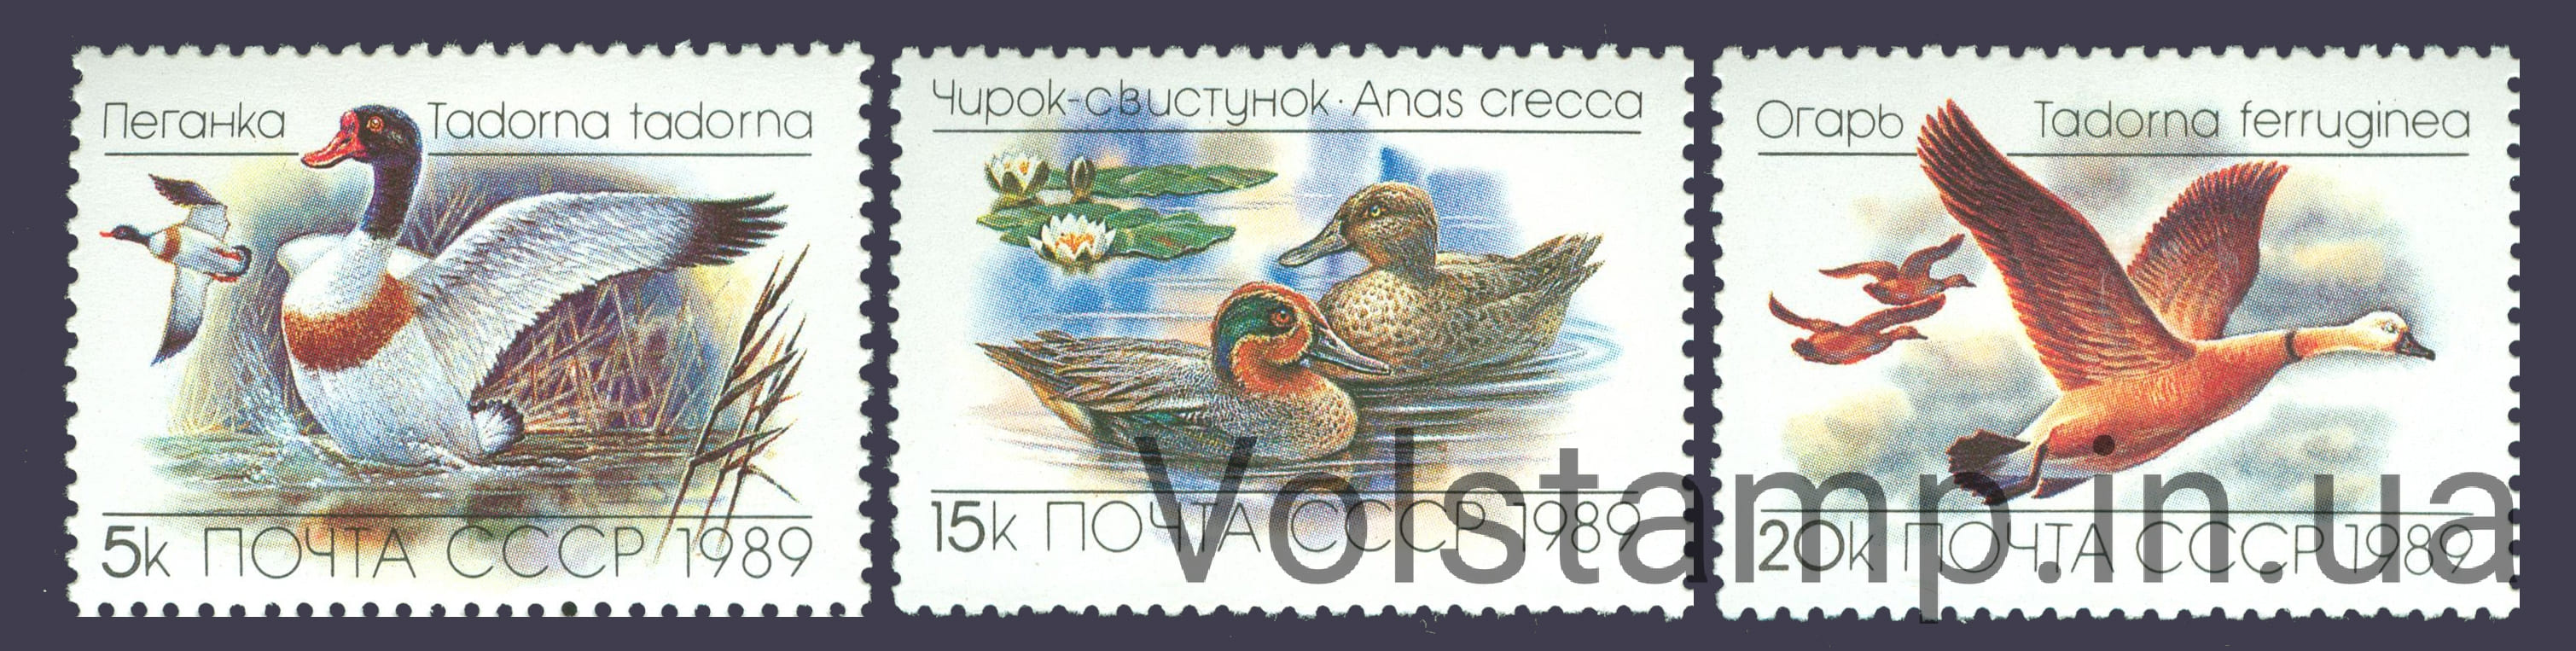 1989 series of stamps Duck №6017-6019